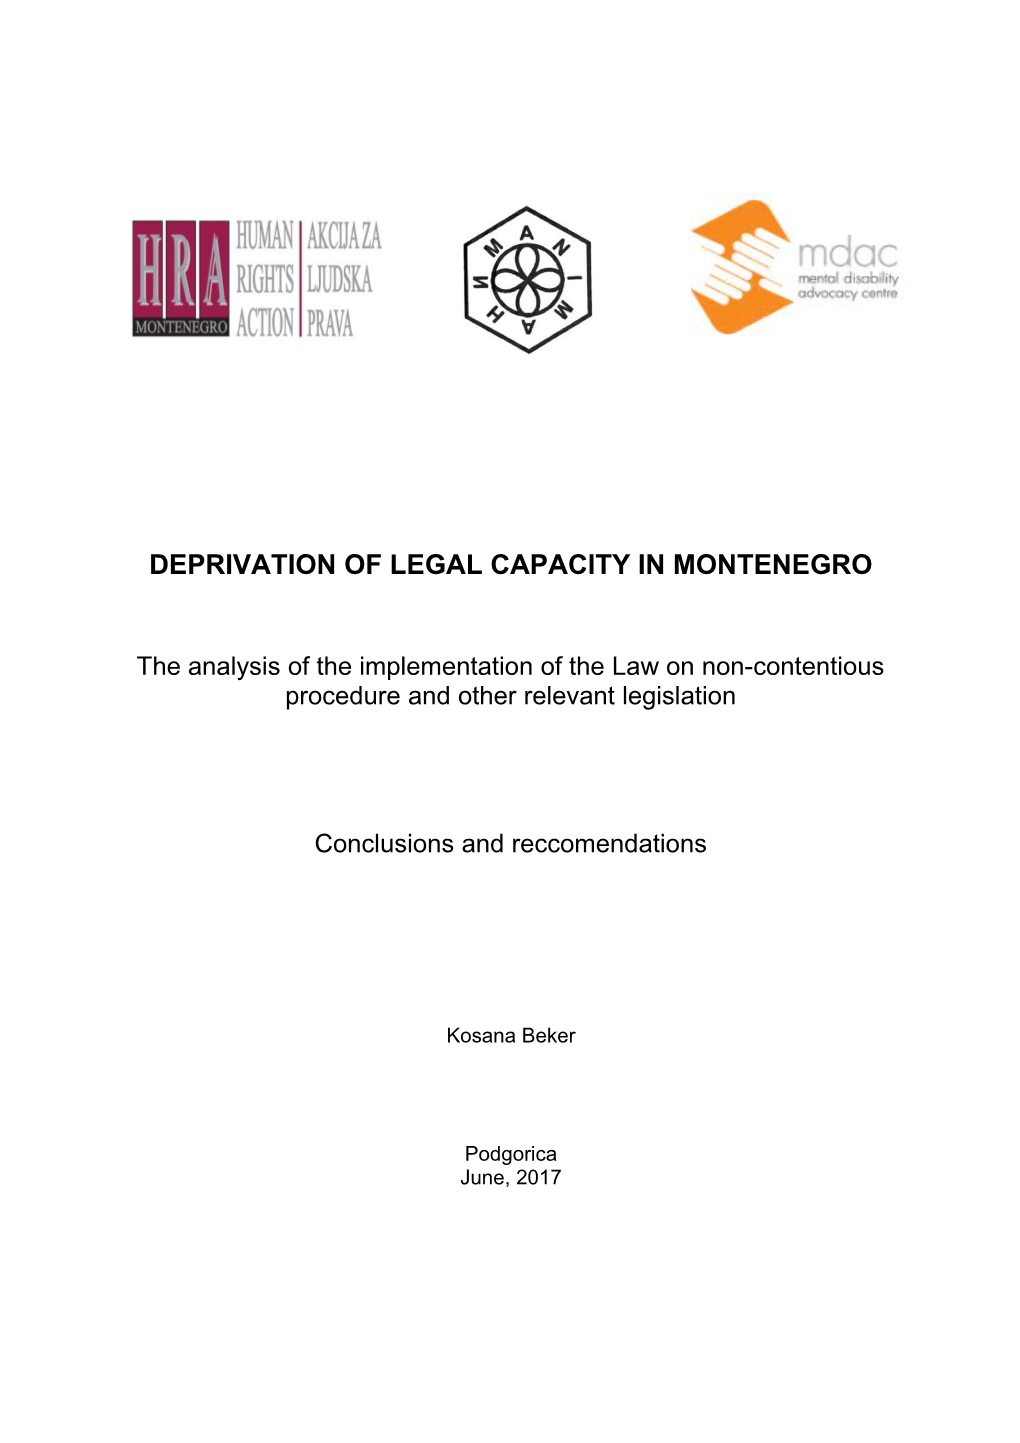 Deprivation of Legal Capacity in Montenegro